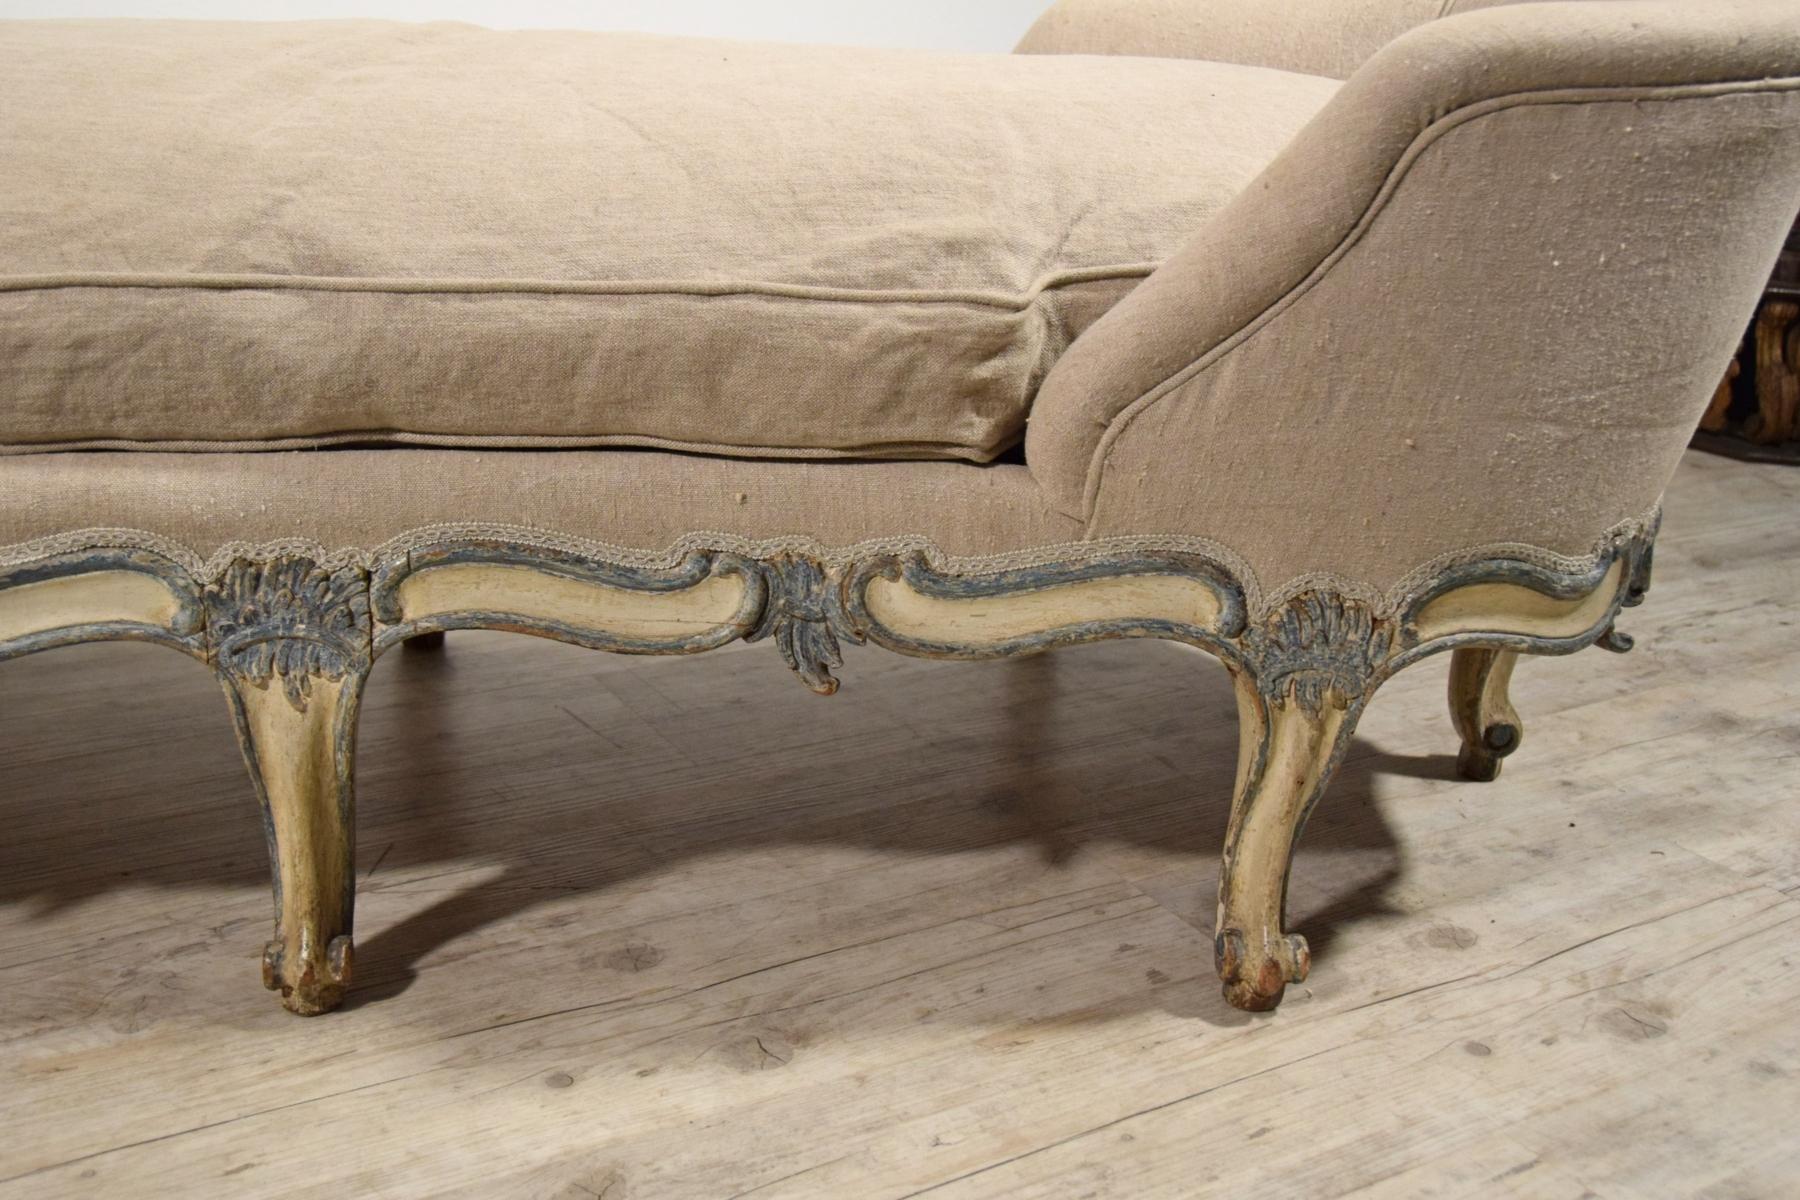 18th Century, Italian Baroque Carved and Lacquered Wood Chaise Longue  5